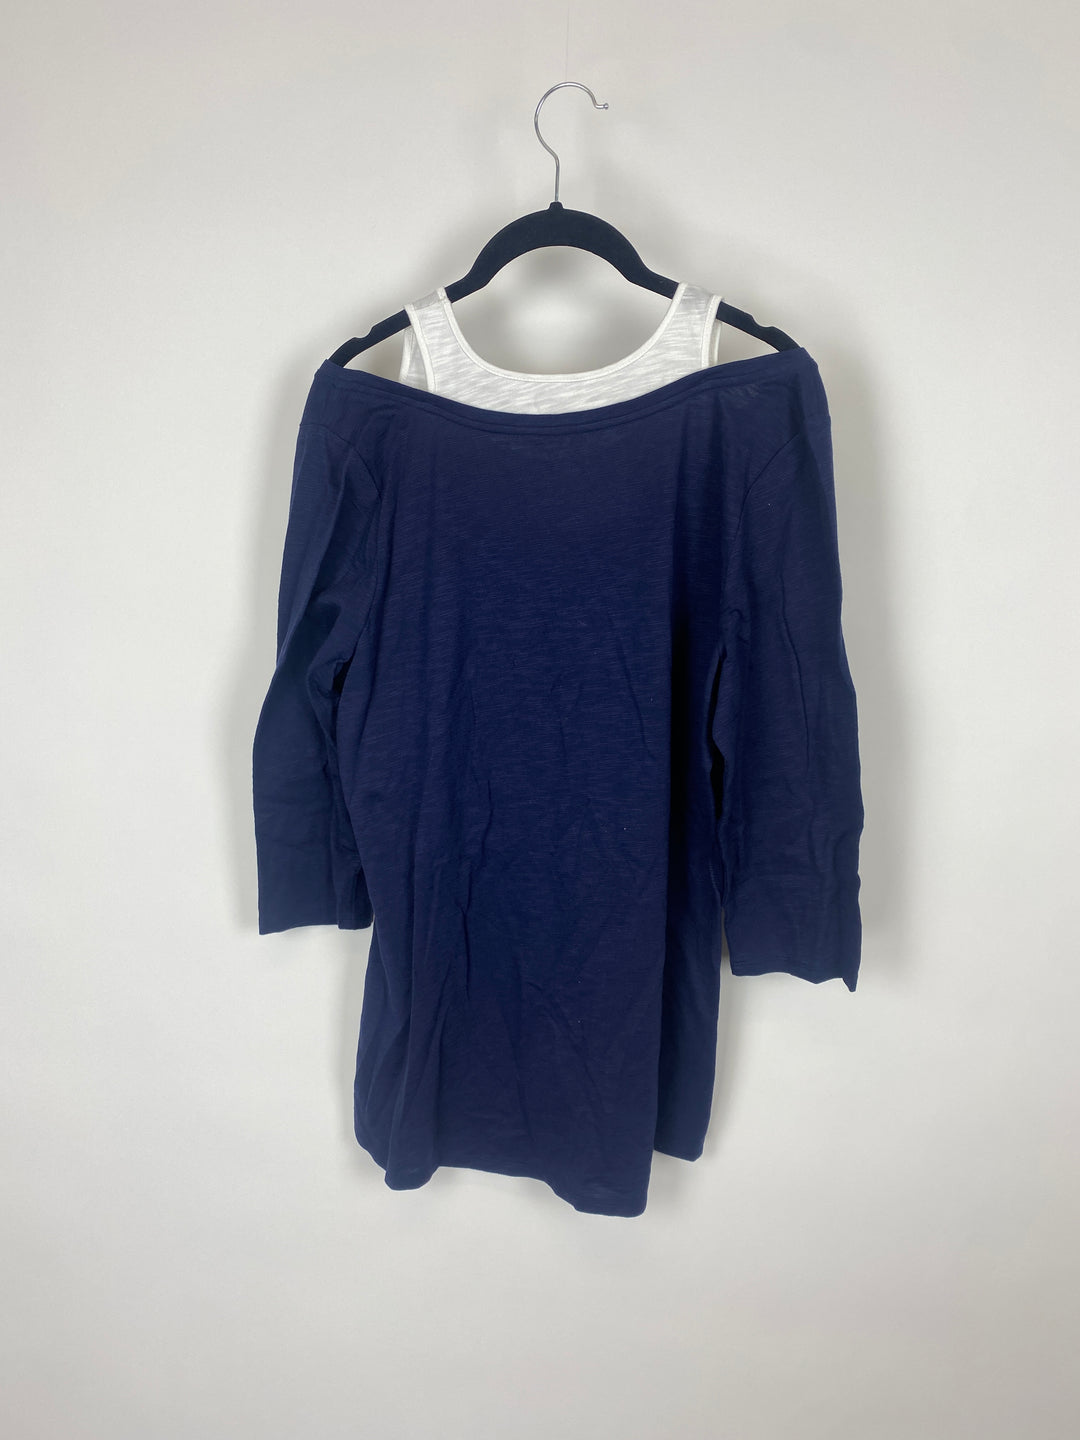 Blue Faux Layered Top - Small/Medium